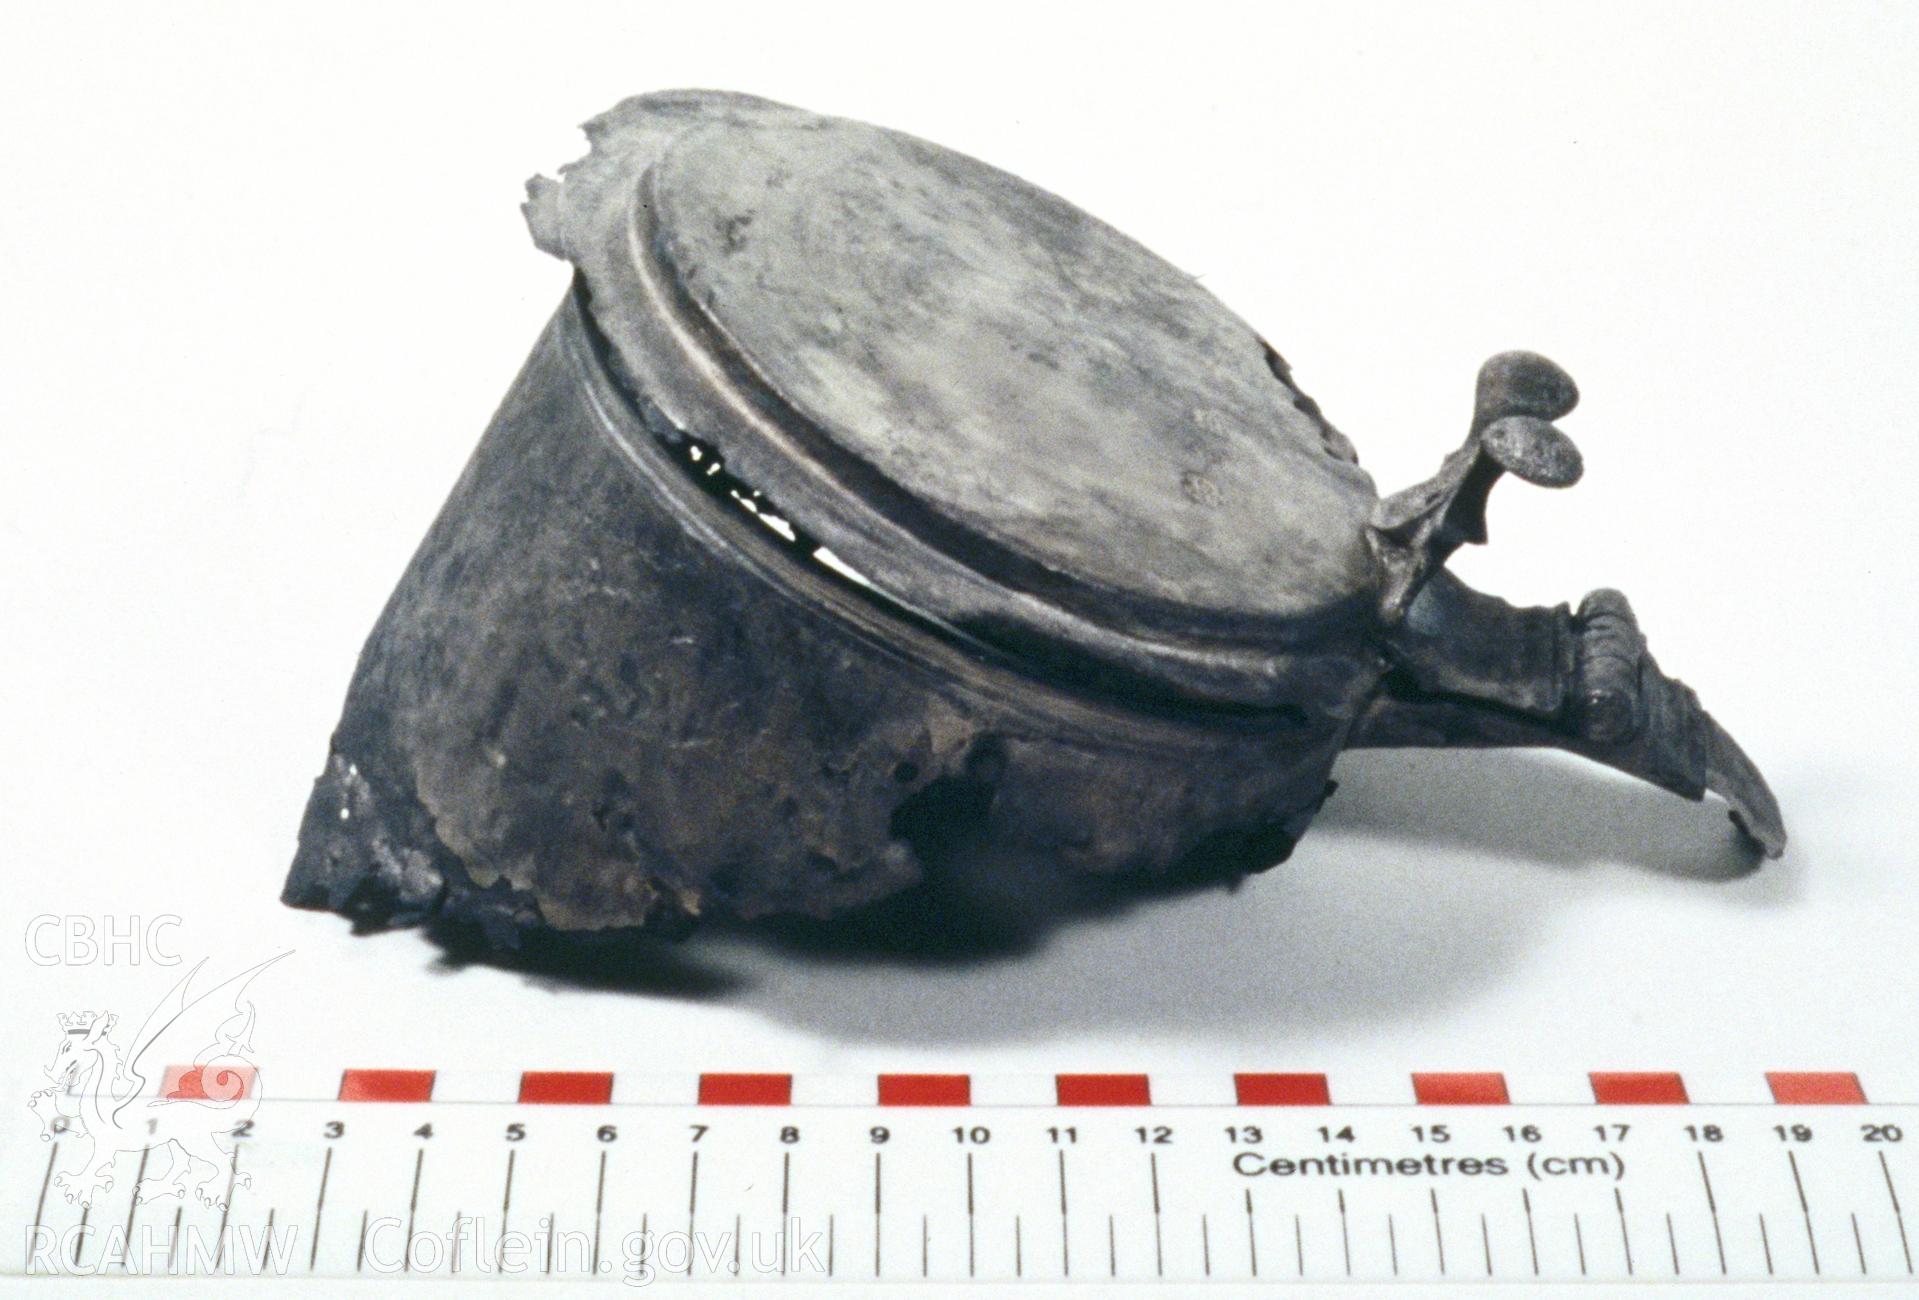 Colour slide showing find from site, part of tankard, from a survey of the Mary designated shipwreck, courtesy of National Museums, Liverpool (Merseyside Maritime Museum)